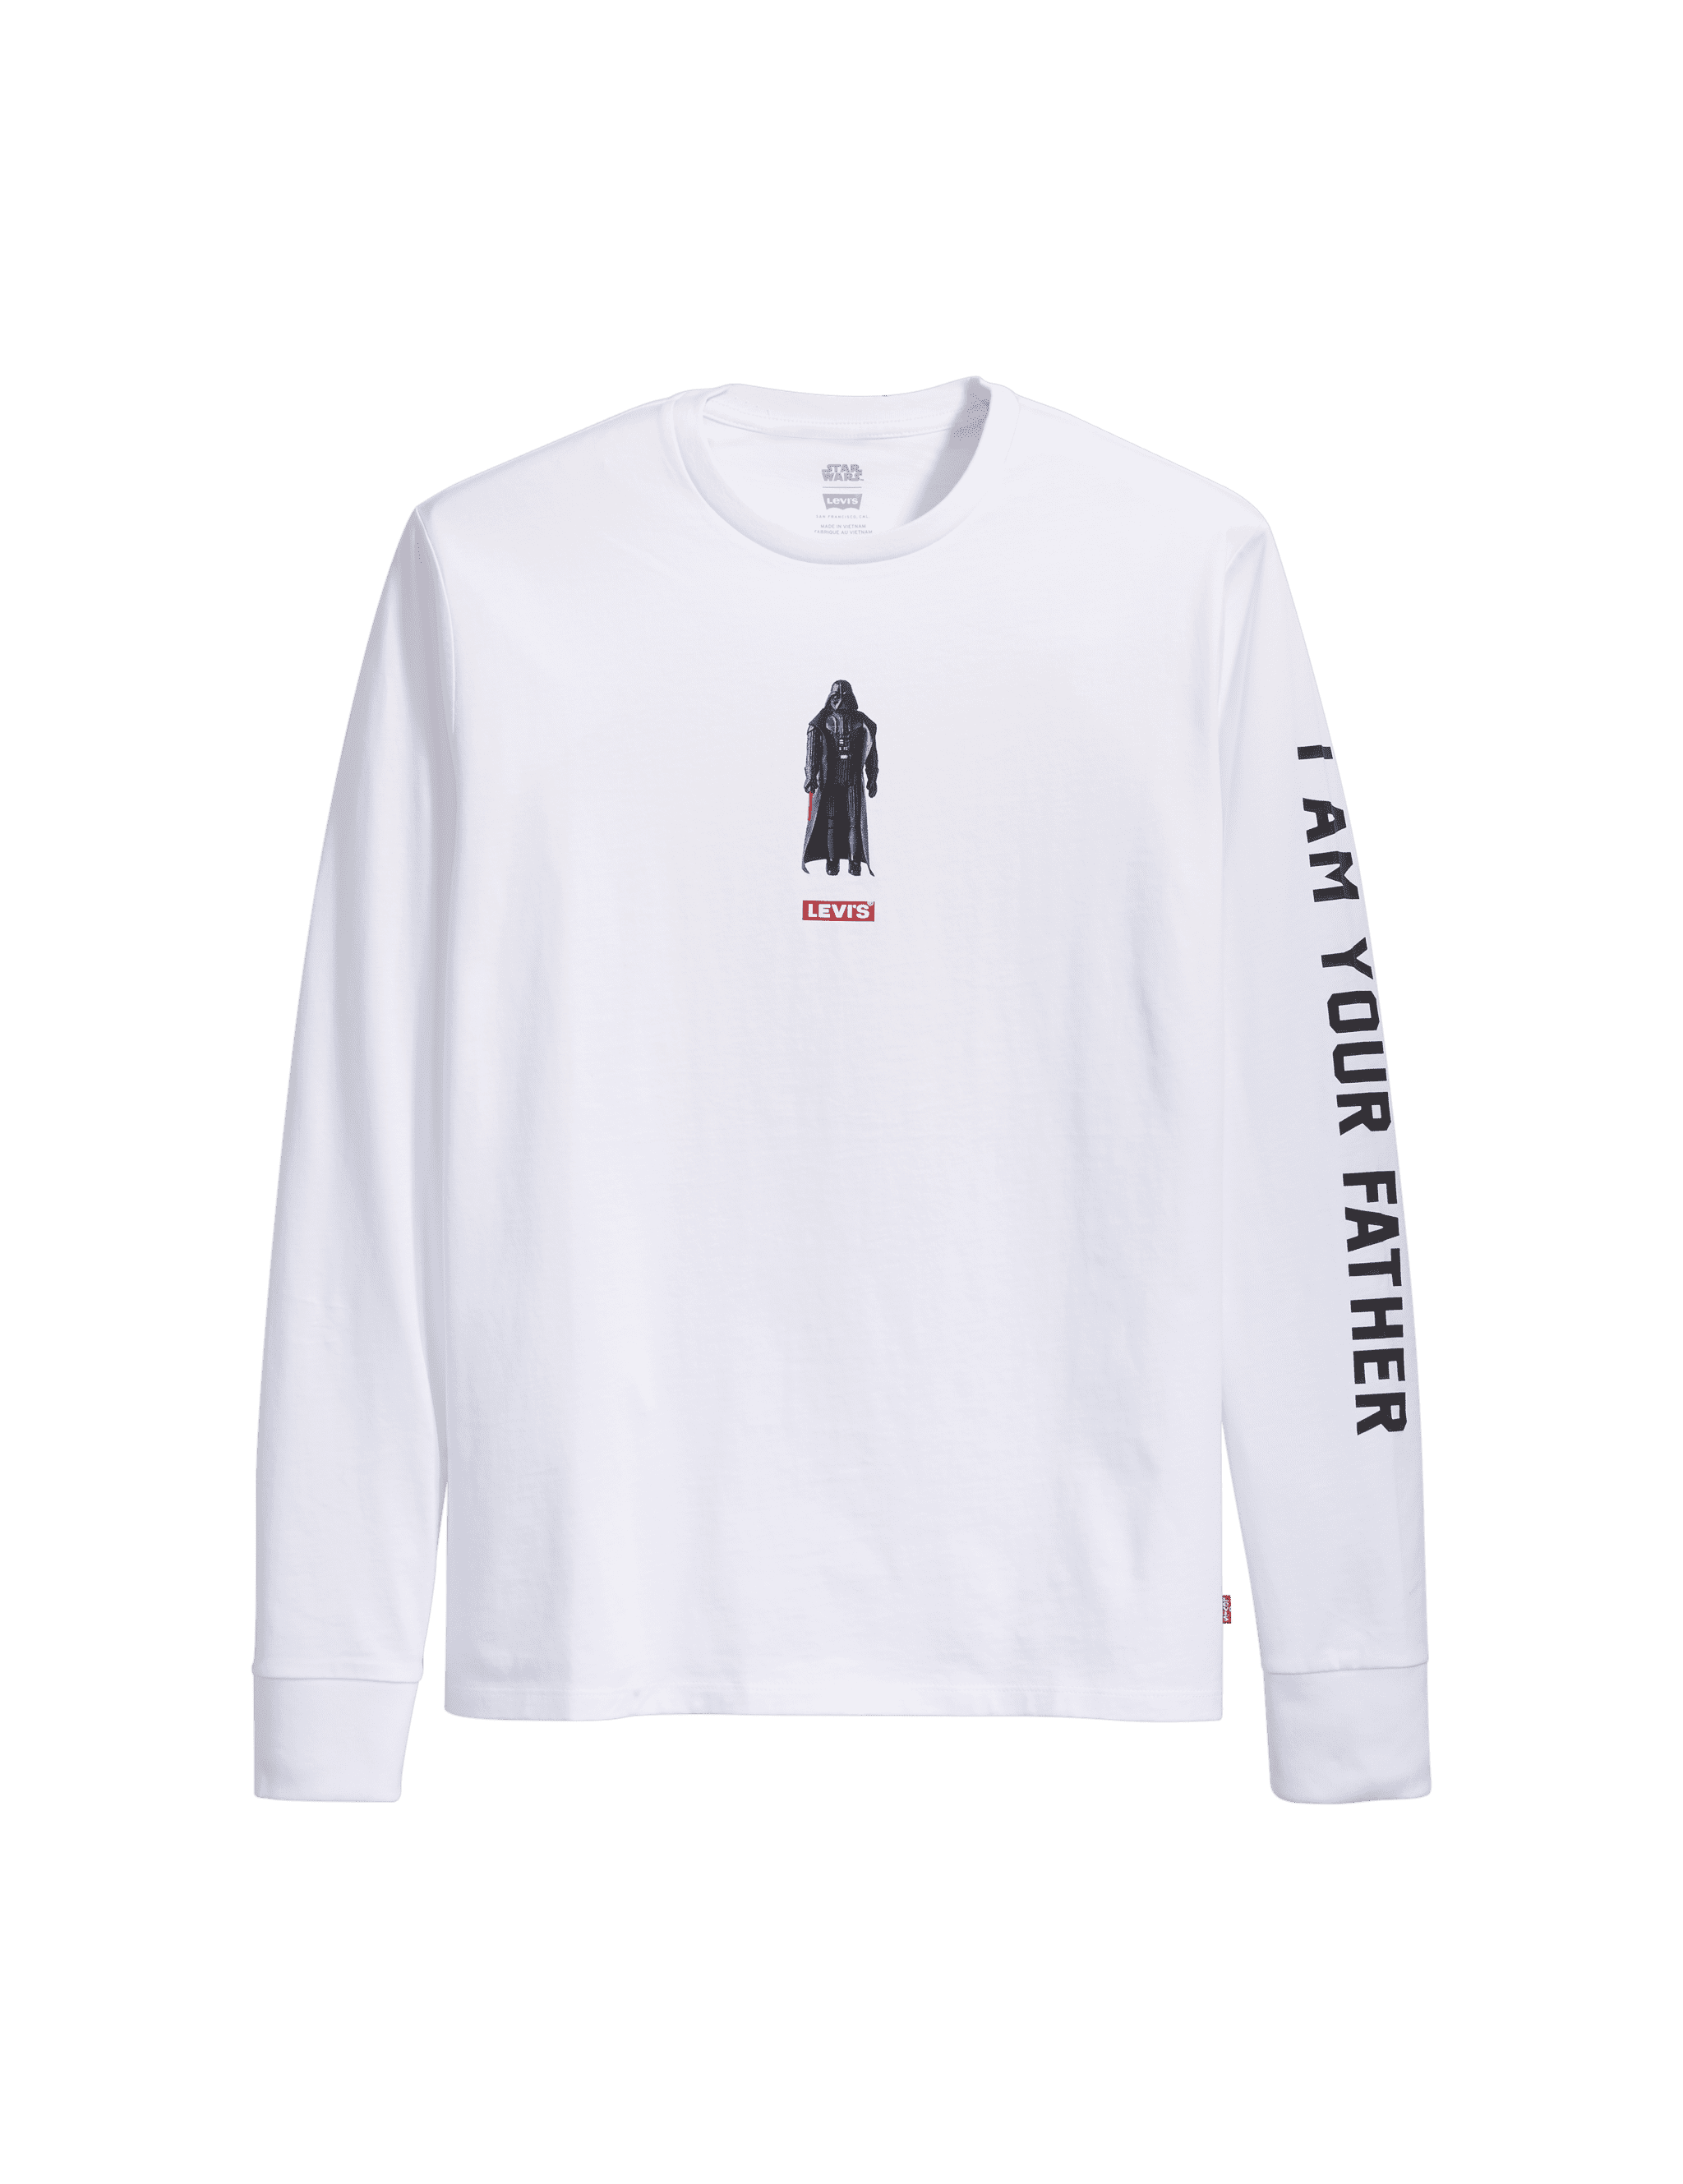 Levi's x Star Wars Darth Vader I Am Your Father Crewneck Shirt | This Levi's  x Star Wars Clothing Collection Is So Cute, Even Luke Skywalker Couldn't  Resist | POPSUGAR Fashion Photo